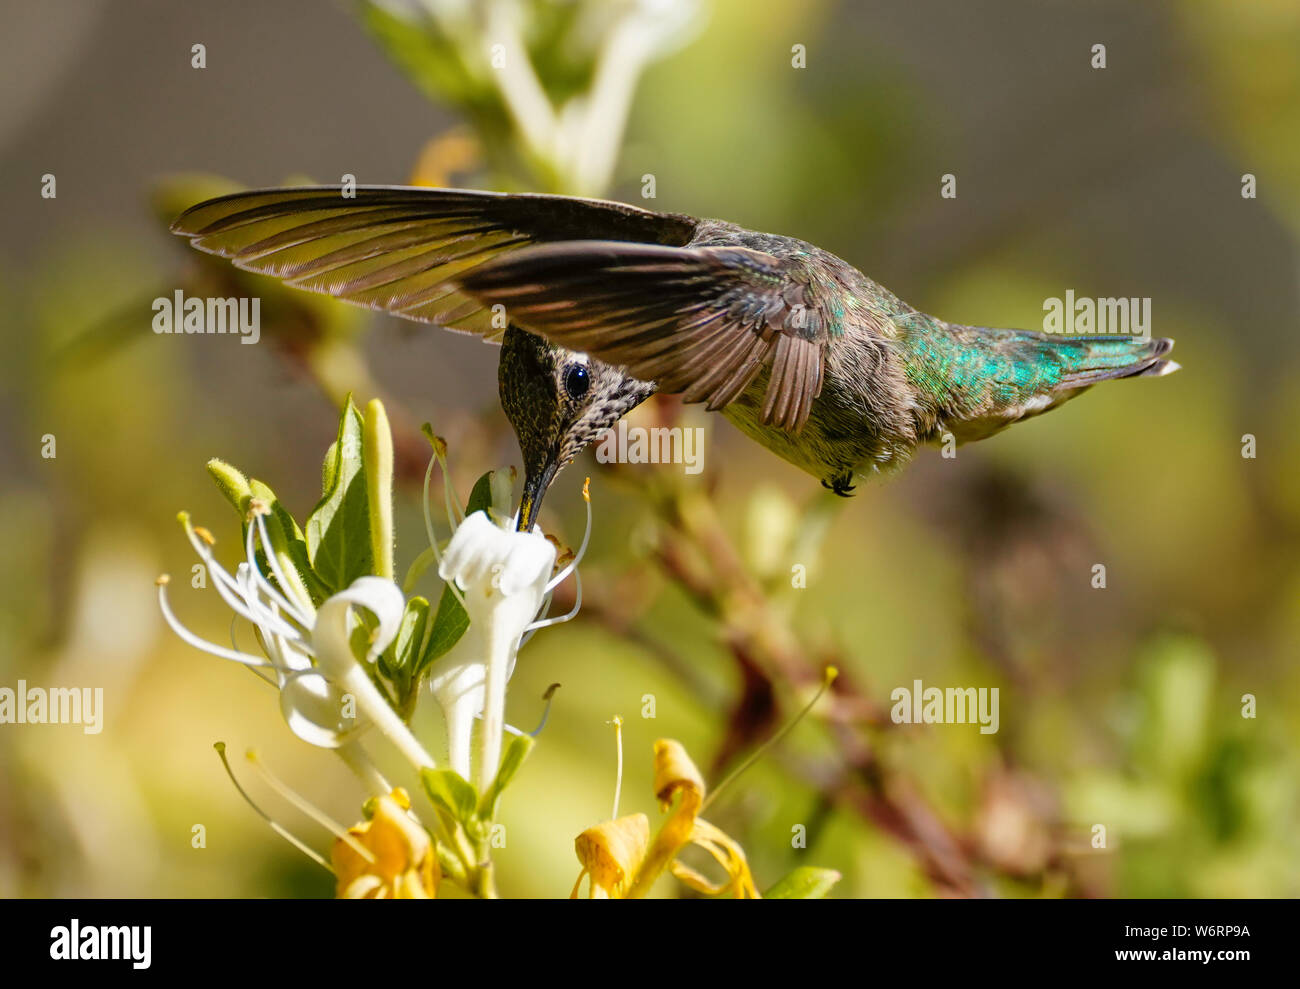 A hummingbird in flight has it's beak down in the middle of a honeysuckle flower. Stock Photo